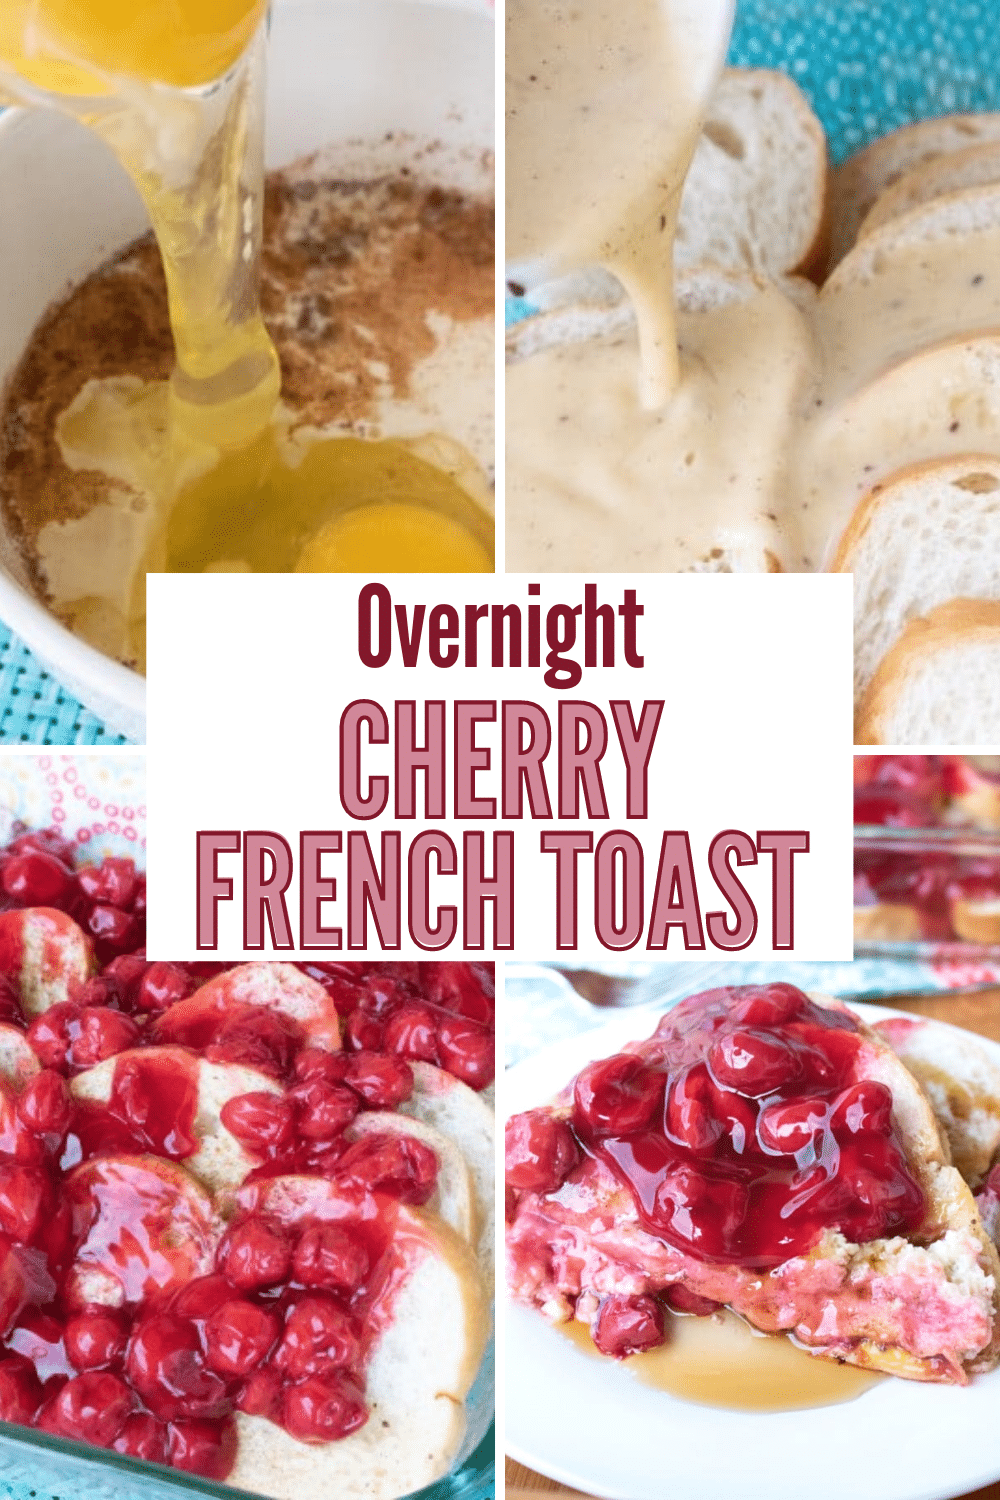 Overnight Cherry Baked French Toast Casserole with a twist.